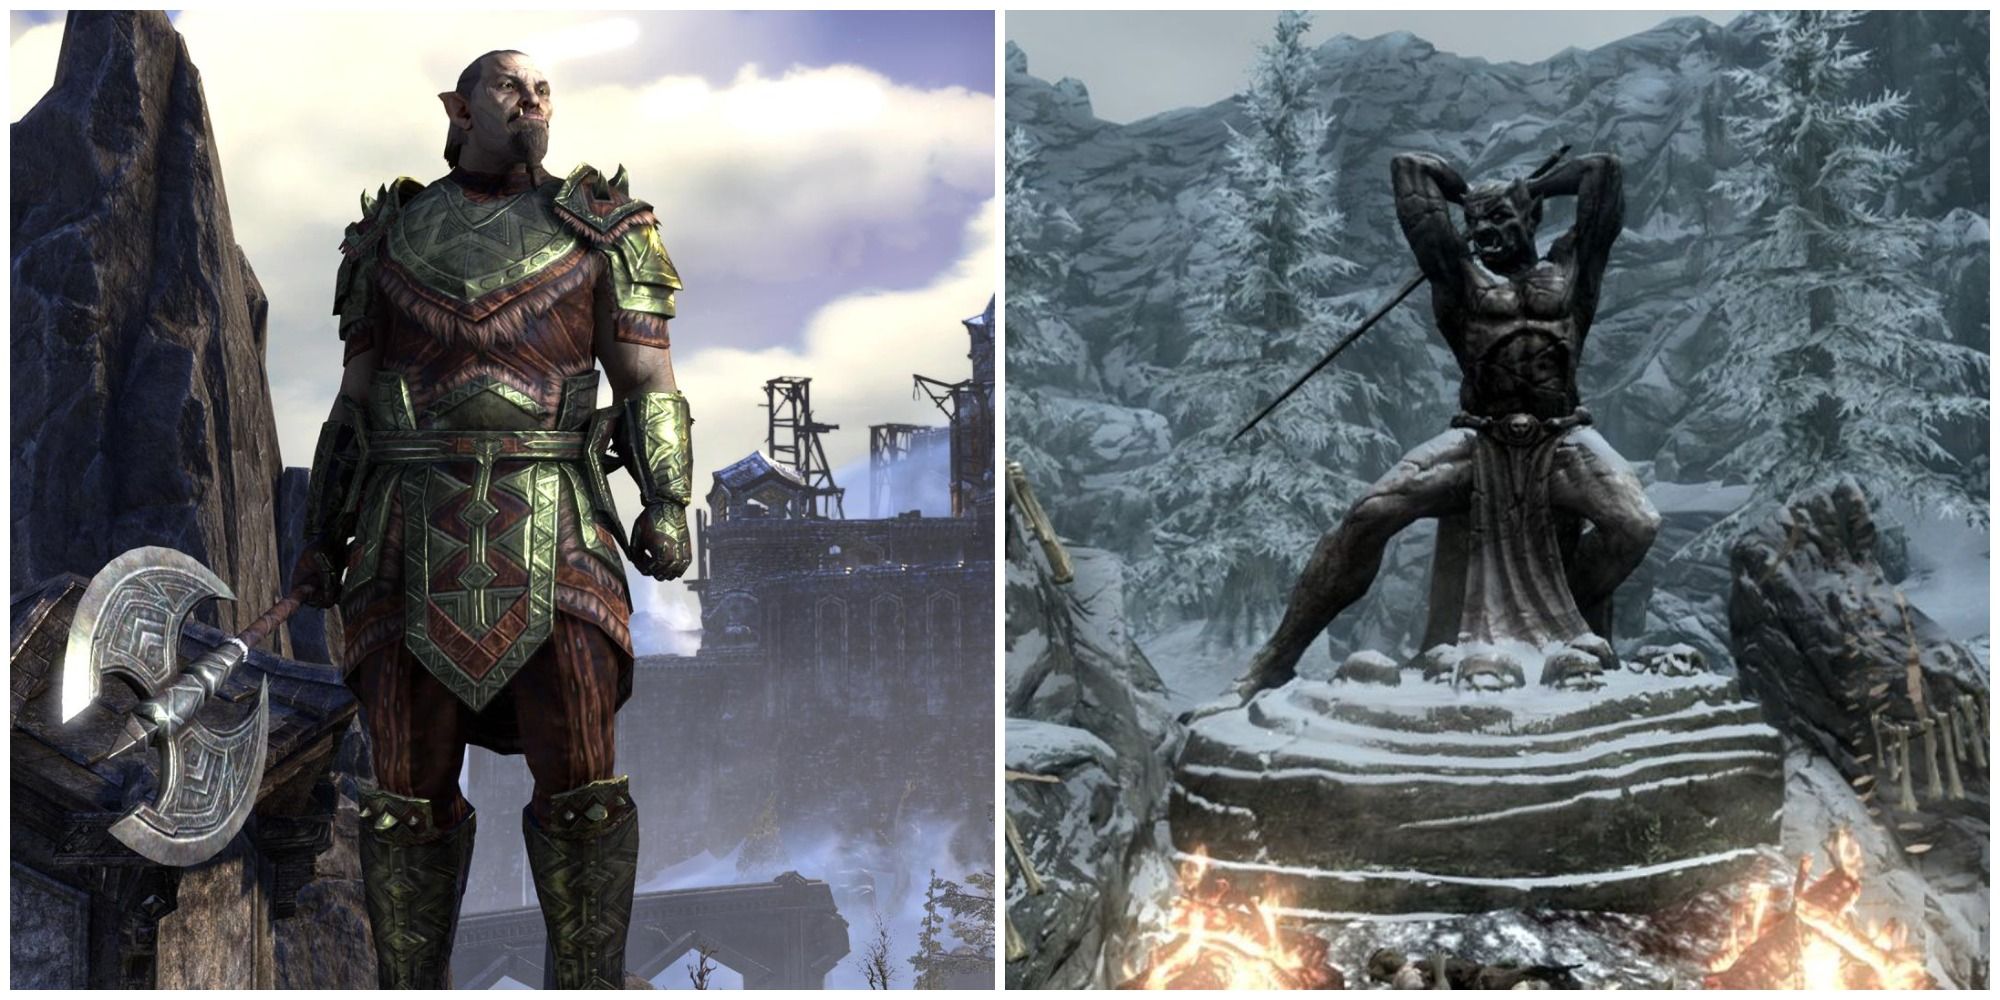 Elder-Scrolls-Orcs-History-Explained-Split-Image-of-Orc-and-Malacath